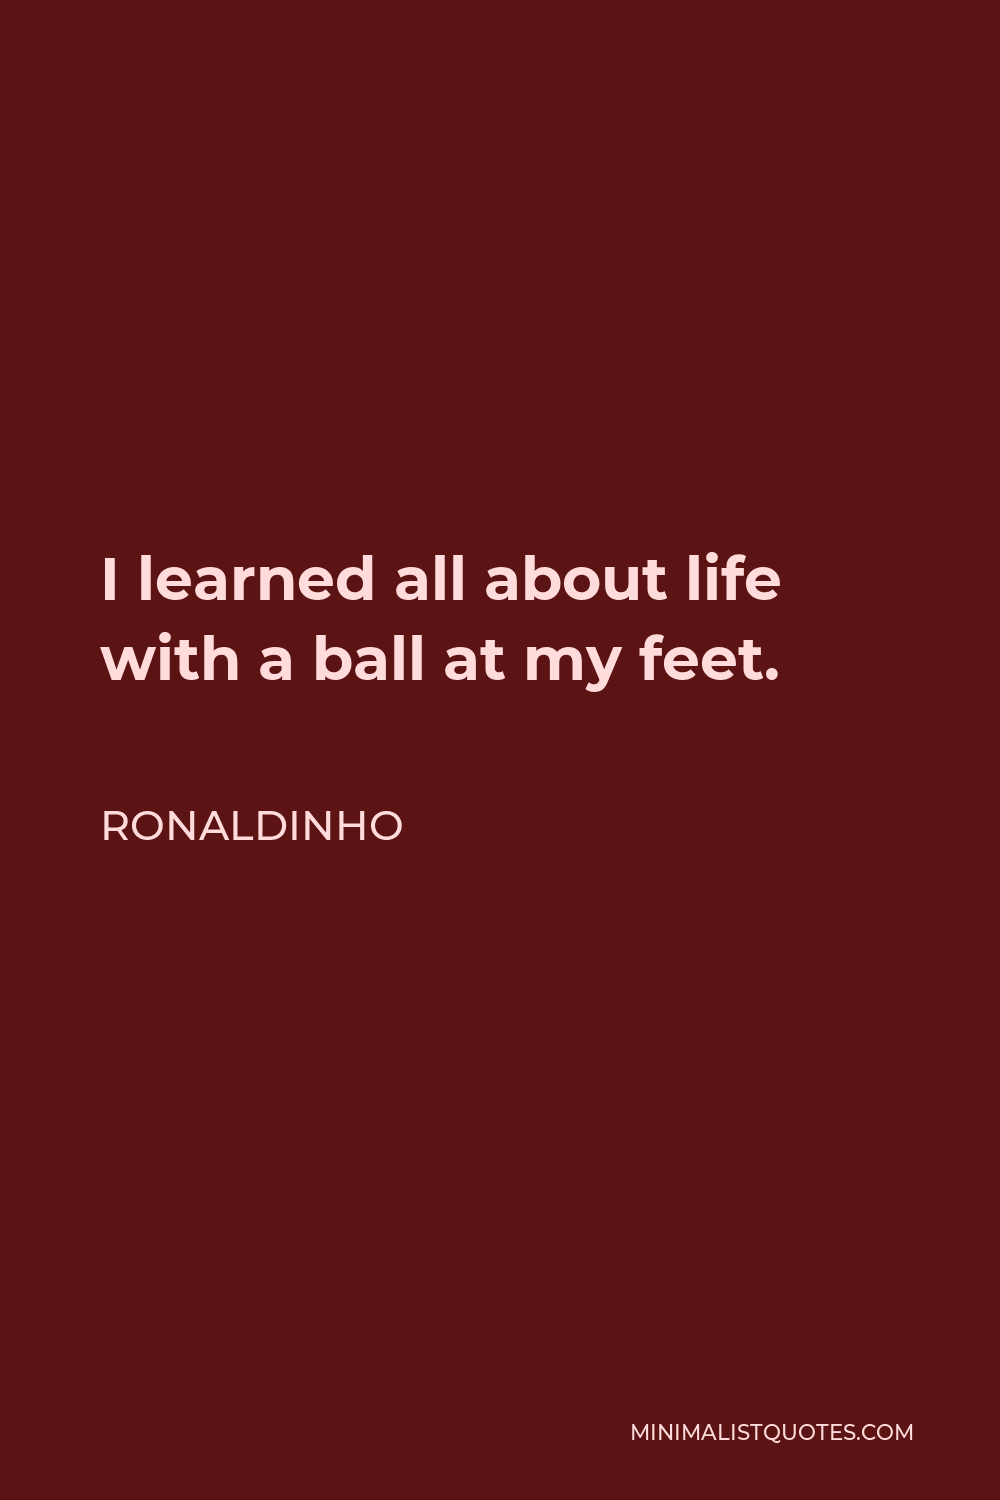 Ronaldinho Quote - I learned all about life with a ball at my feet.